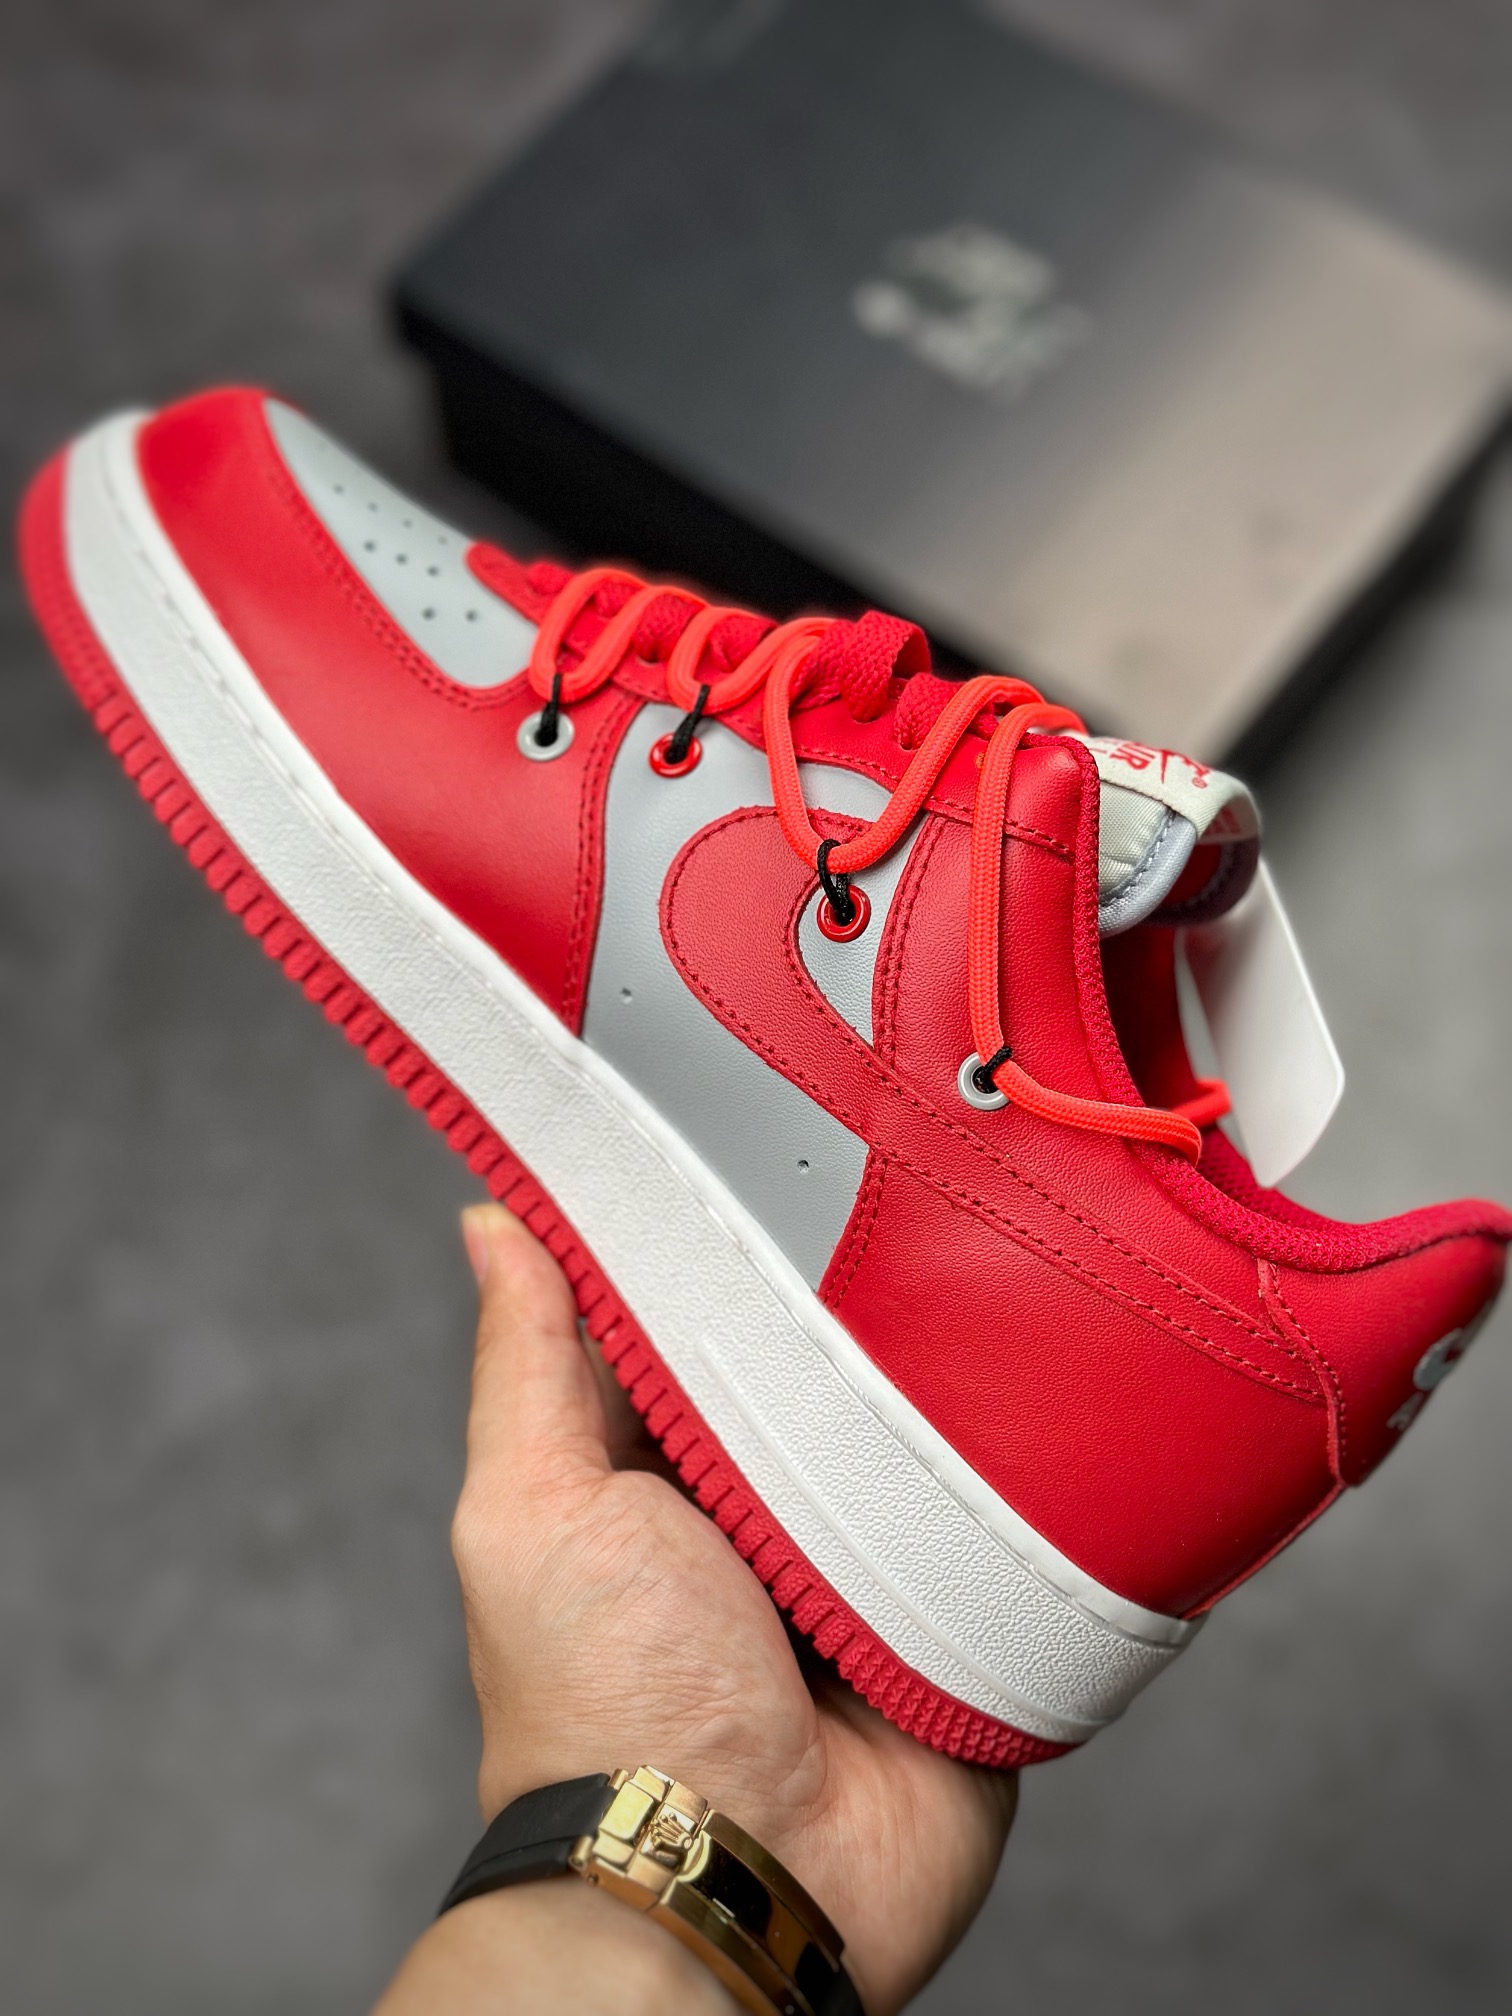 Nike Air Force 1 Low 07 strap gray red CV1724-117